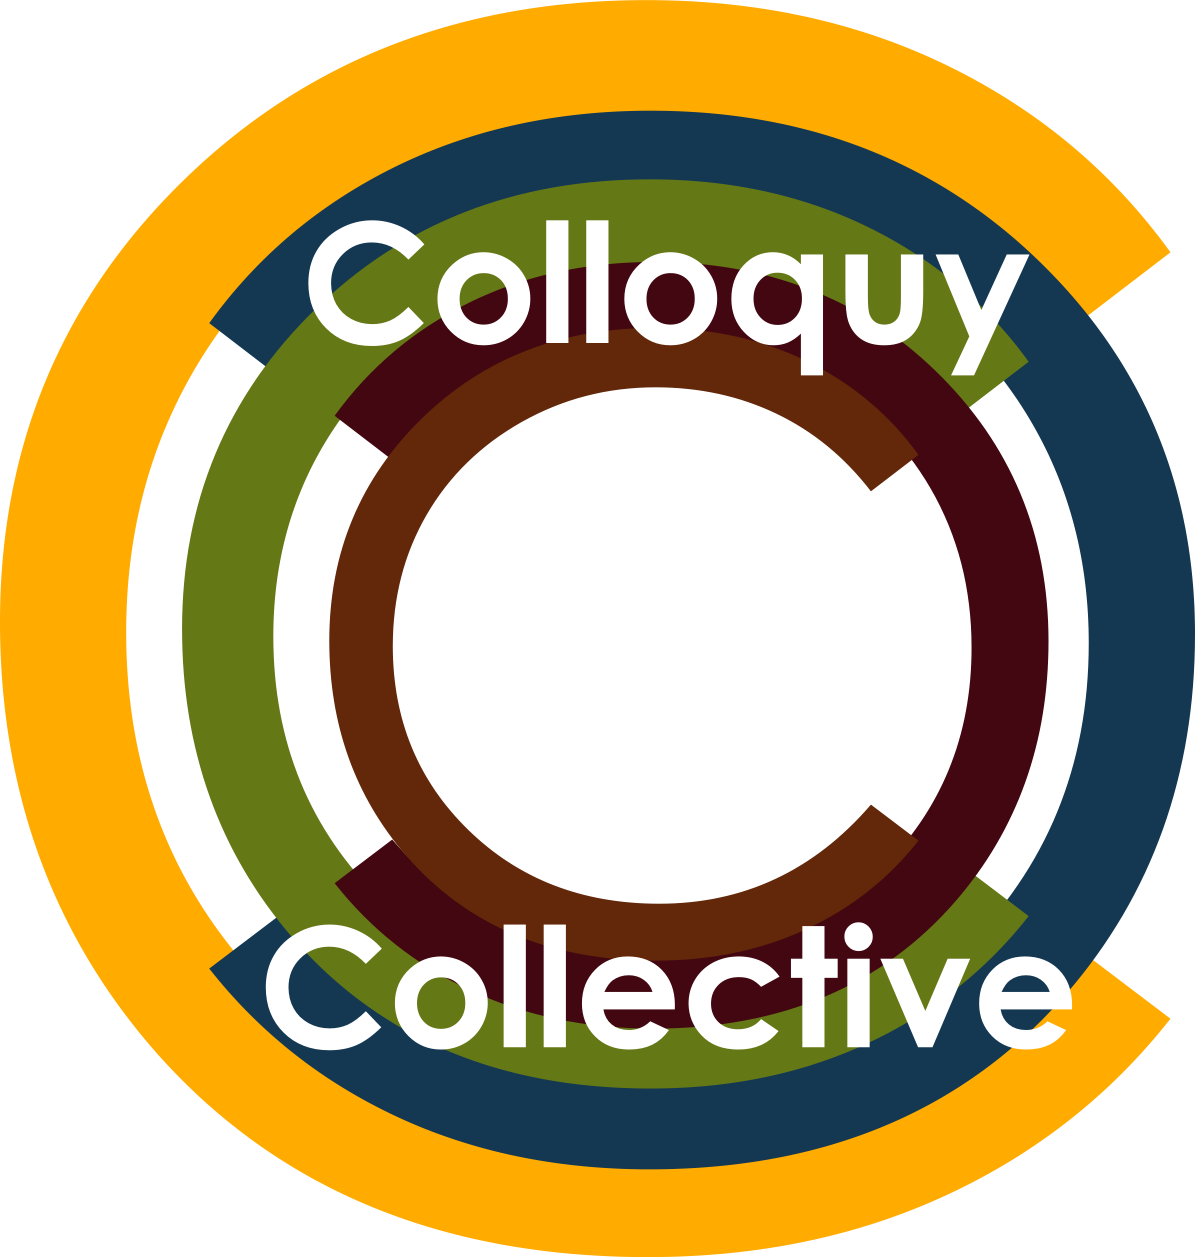 Colloquy Collective